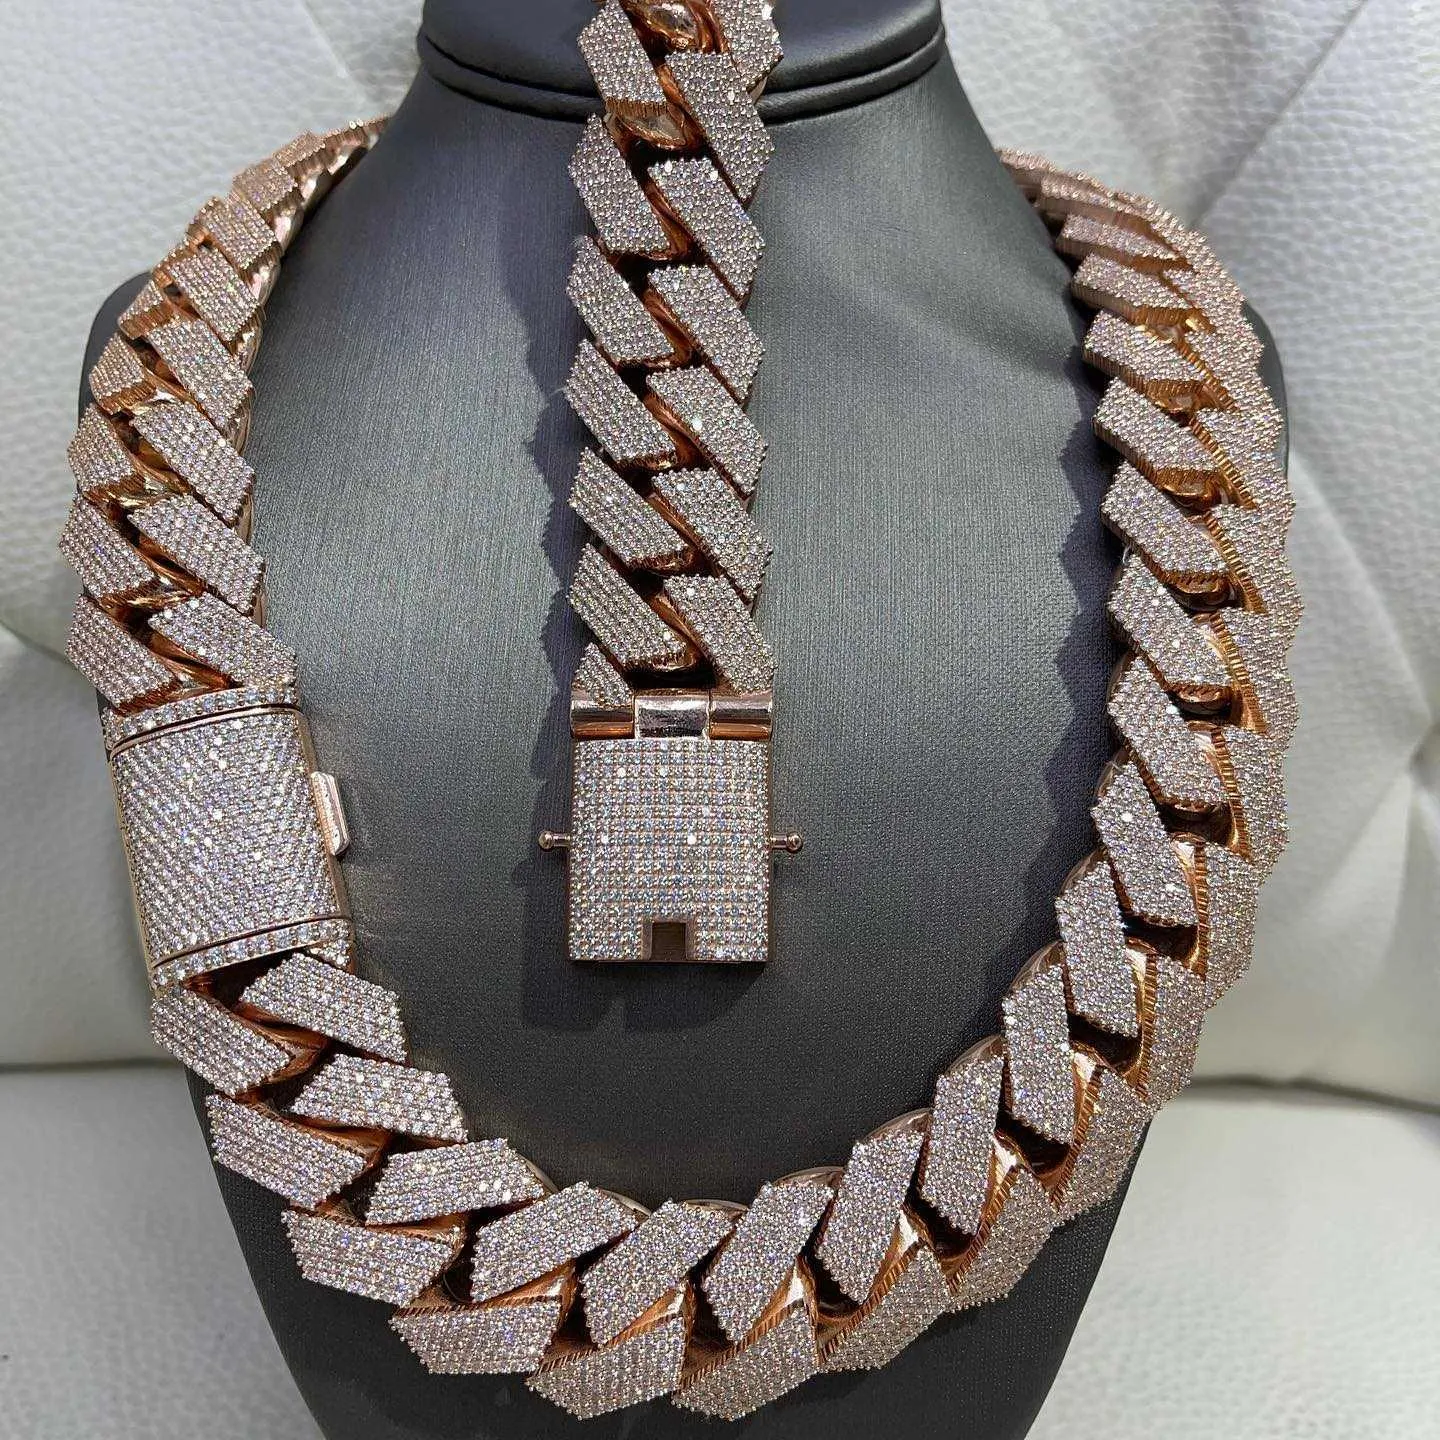 Pendant Necklaces Hip Hop Rapper Cuban Chain 925 Silver 25mm Wide 4 Rows Vvs Moissanite Full Iced Out Cuban Link Chain Necklace